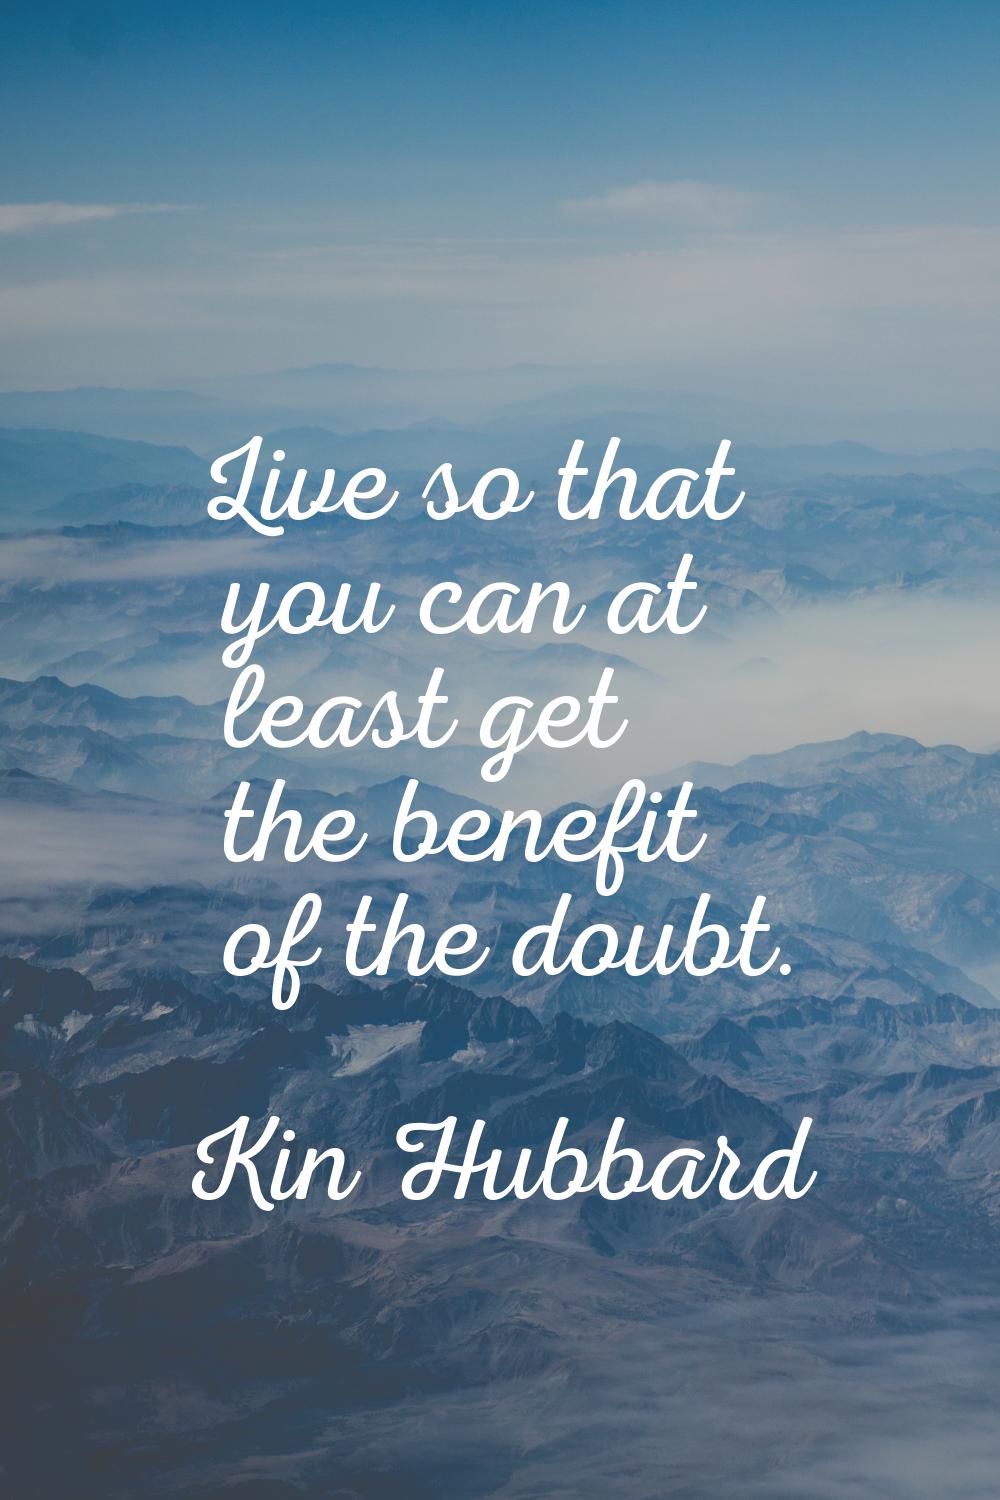 Live so that you can at least get the benefit of the doubt.